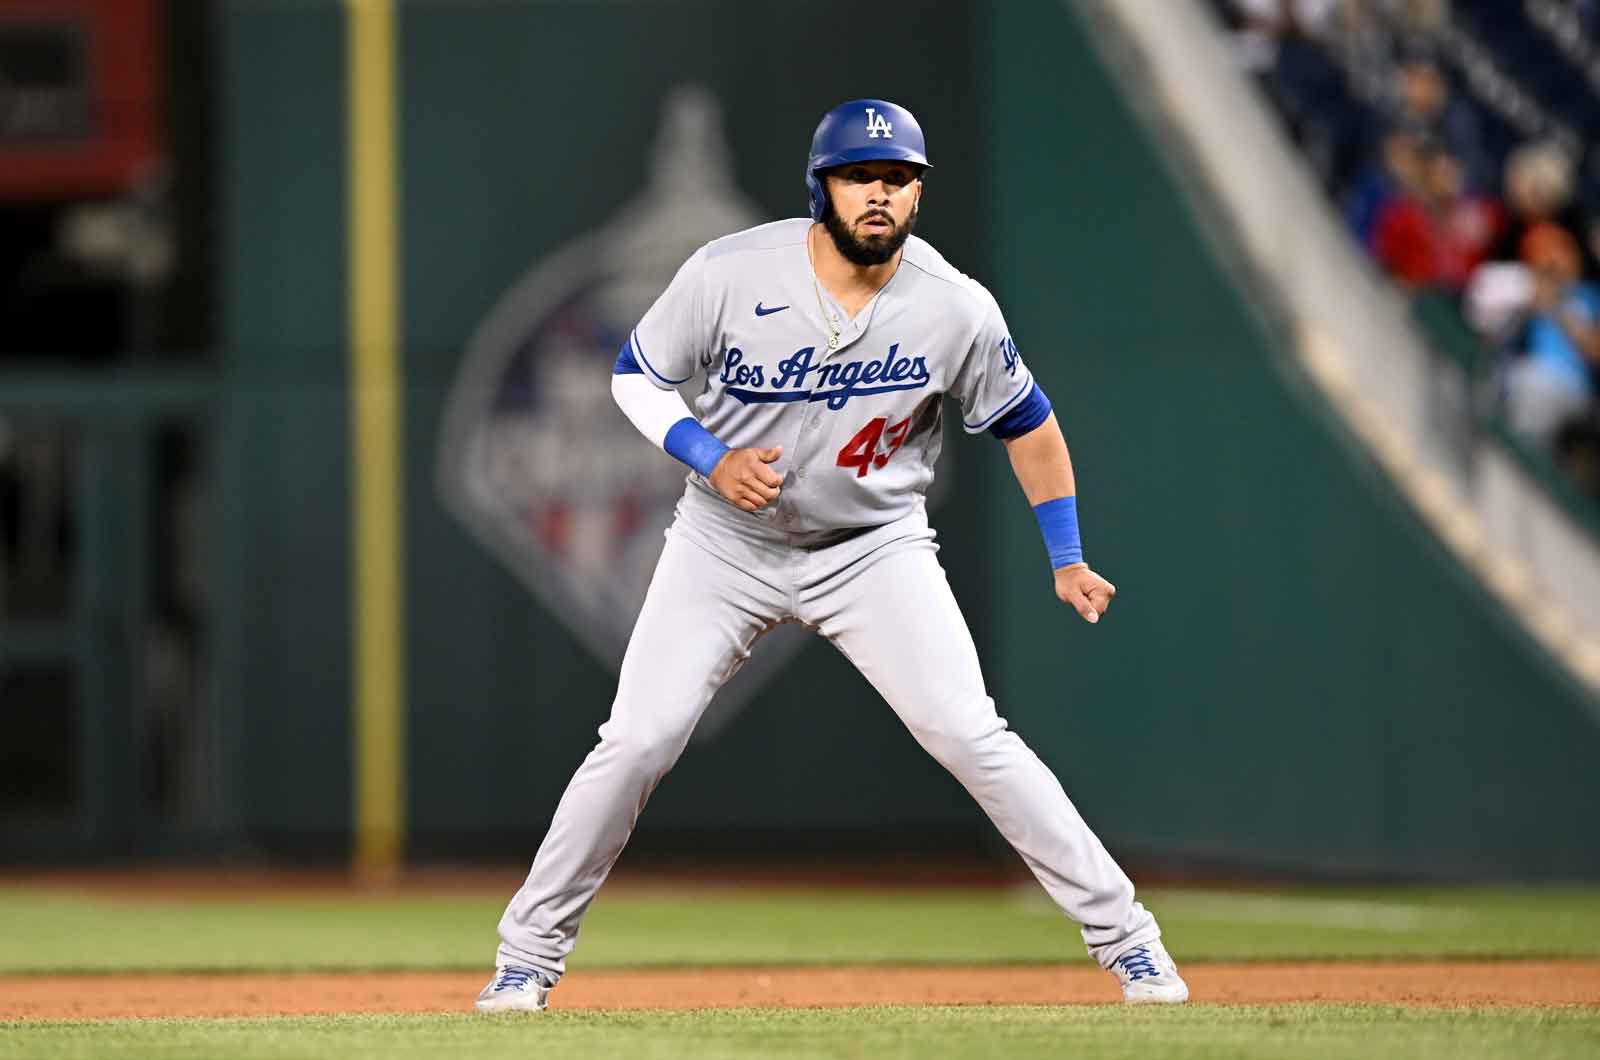 Cubs sign infielder Edwin Ríos to one-year major league contract